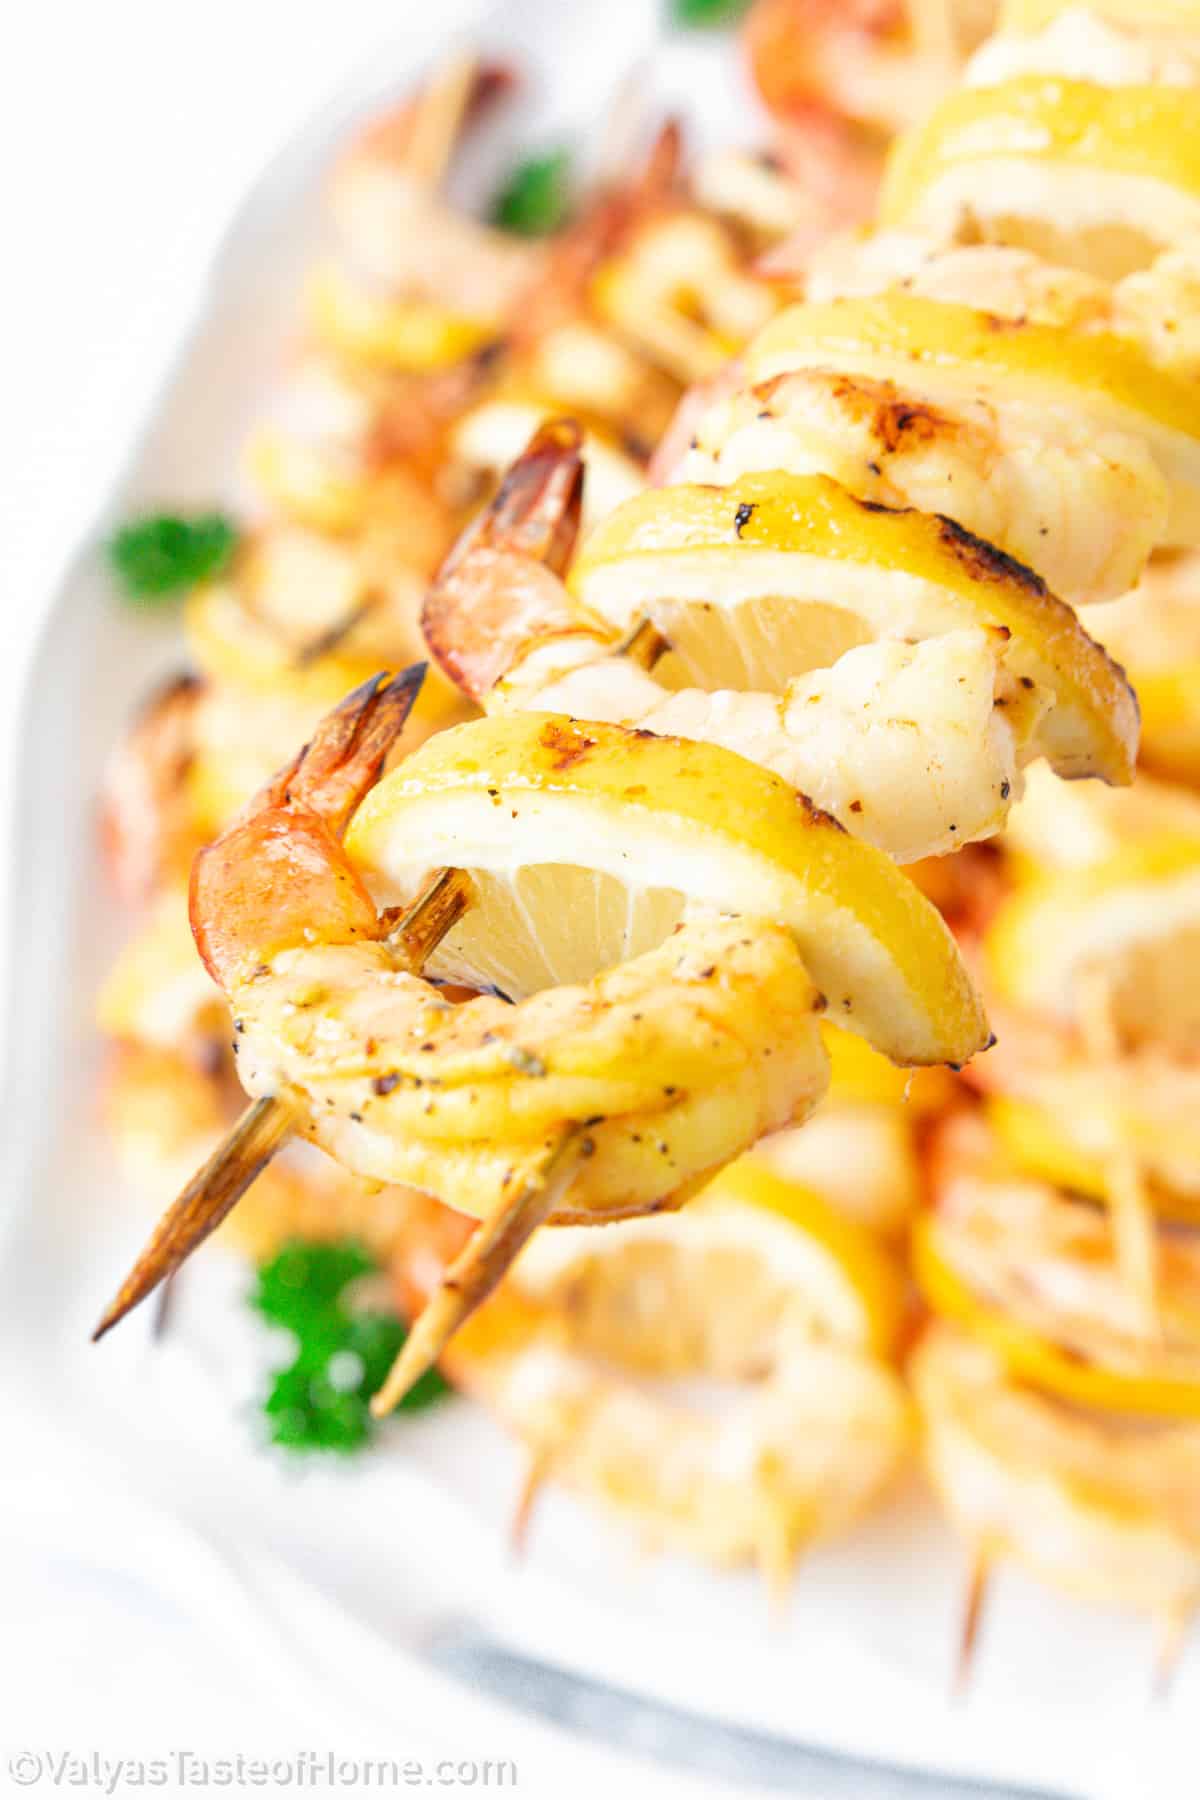 The combination of juicy shrimp, marinated in a tantalizing blend of lemon juice, olive oil, along with lemon pepper seasoning delivers a mouthwatering taste that will leave you craving for more. 